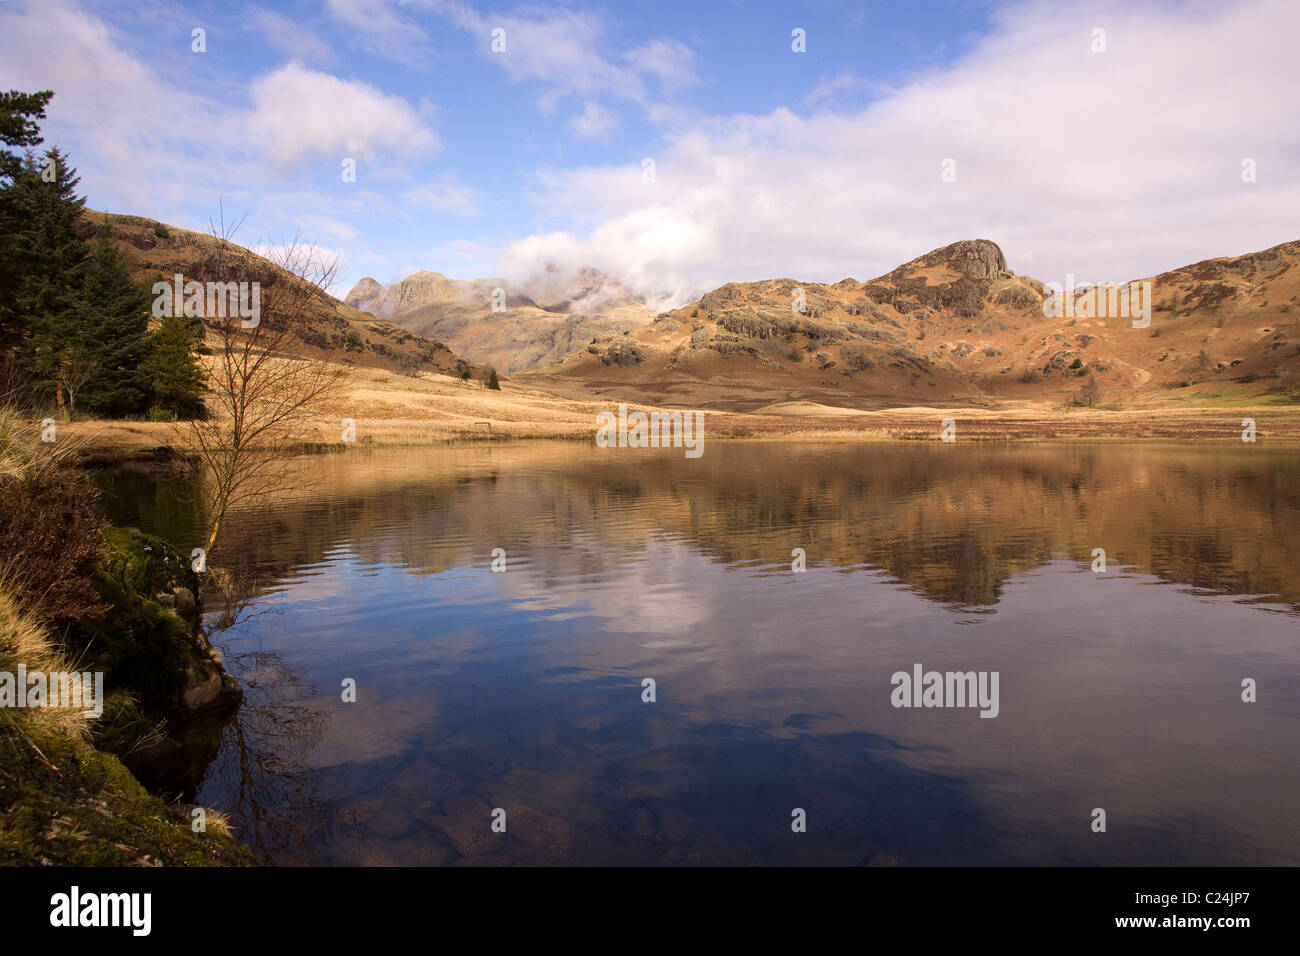 Still waters of Blea Tarn with Langdale Pikes in the distance, Langdale, Lake District, Cumbria, England, UK Stock Photo